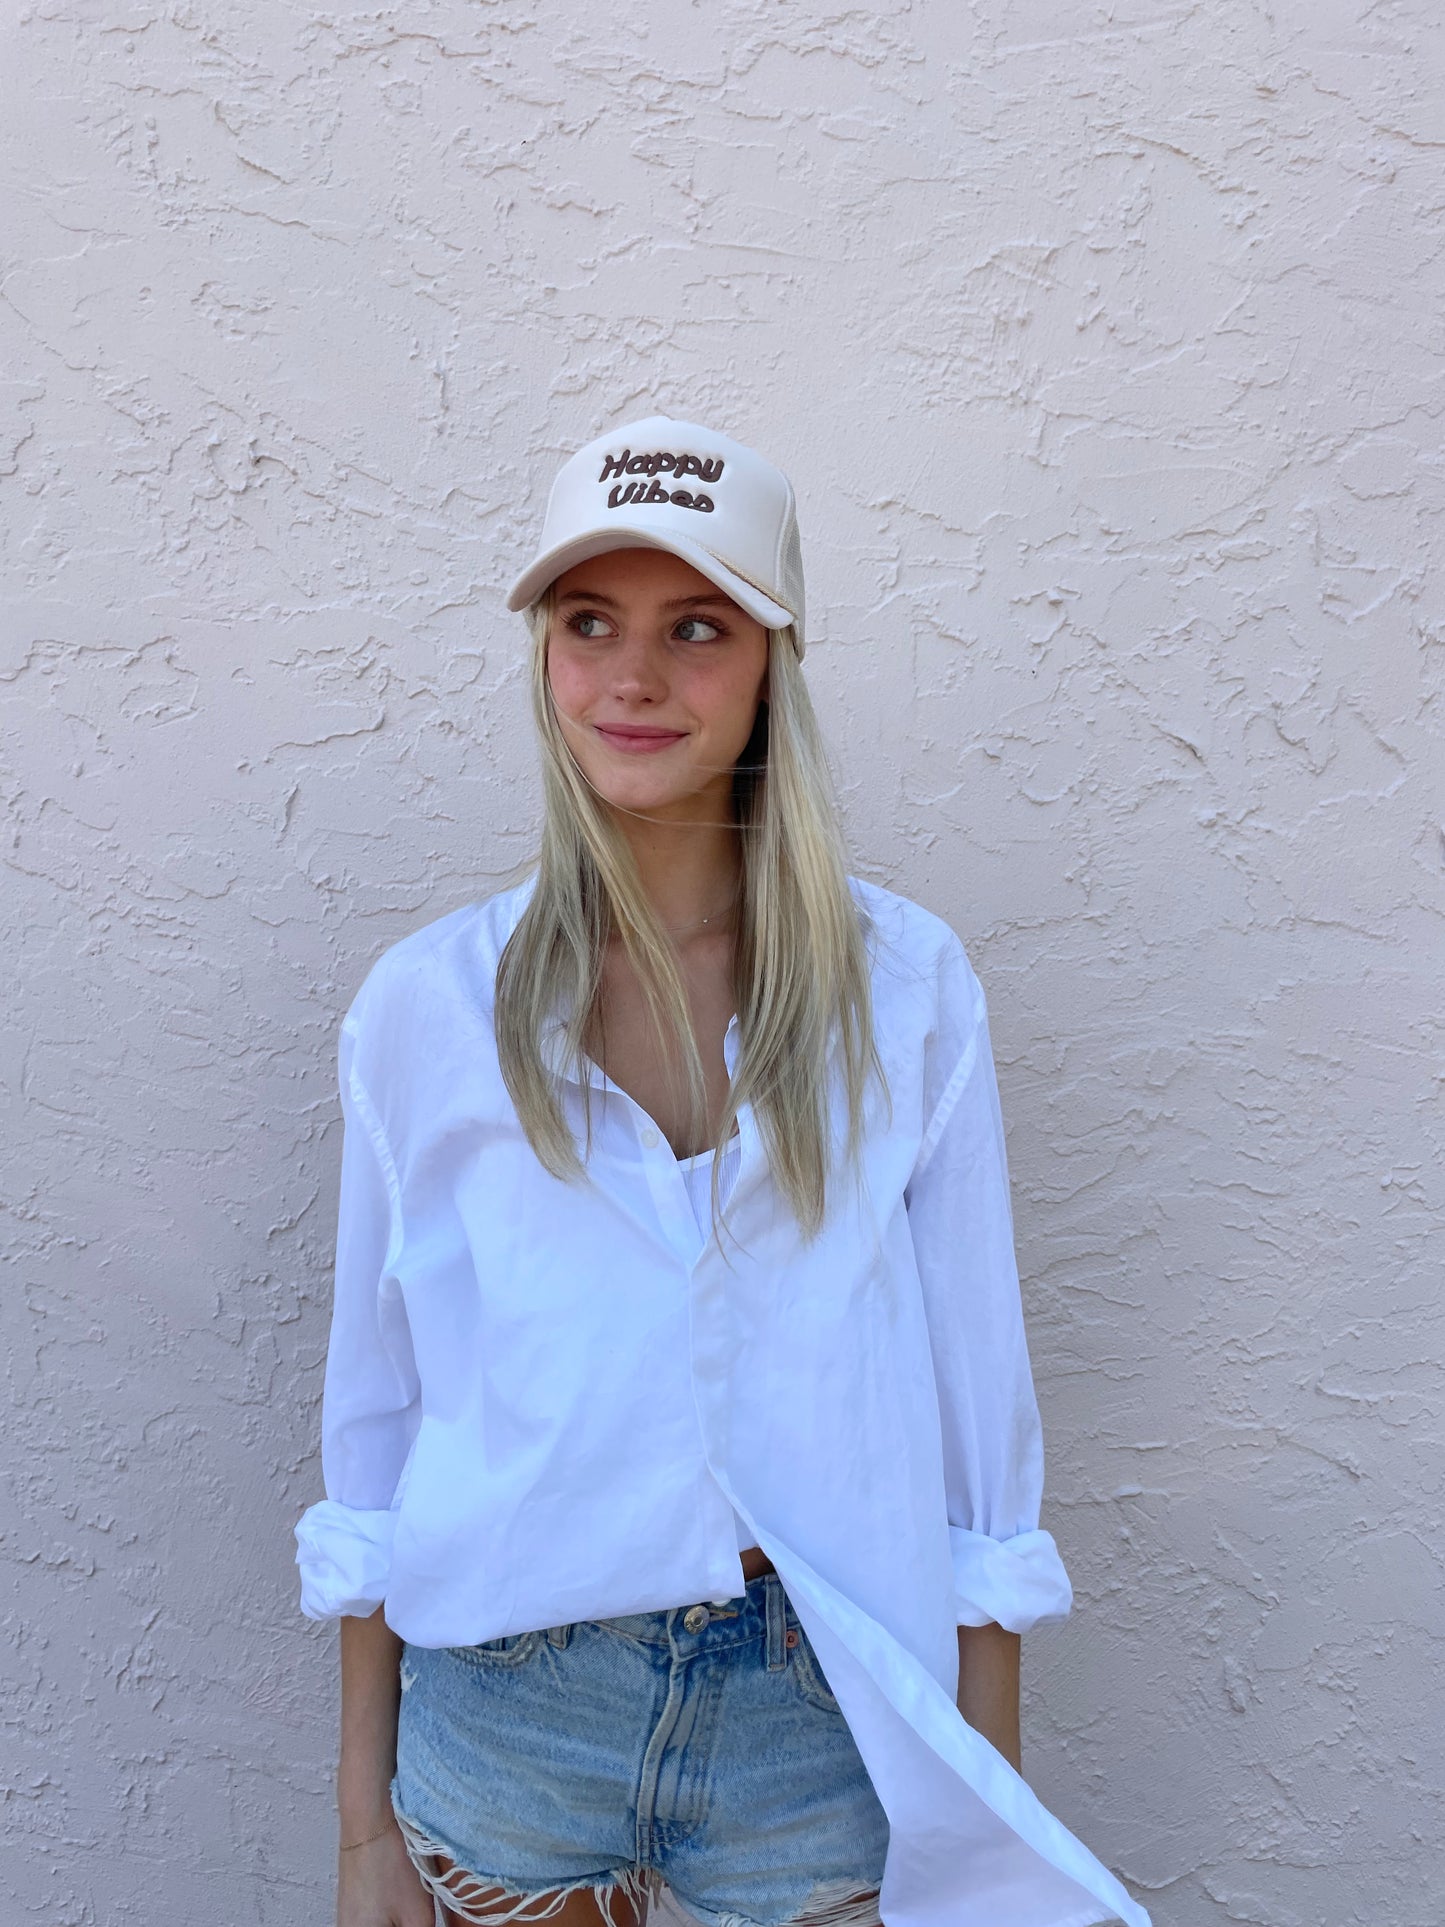 HAPPY VIBES Trucker Hat (SEE- Multiple Color Variations- look through Photos and choose your color)